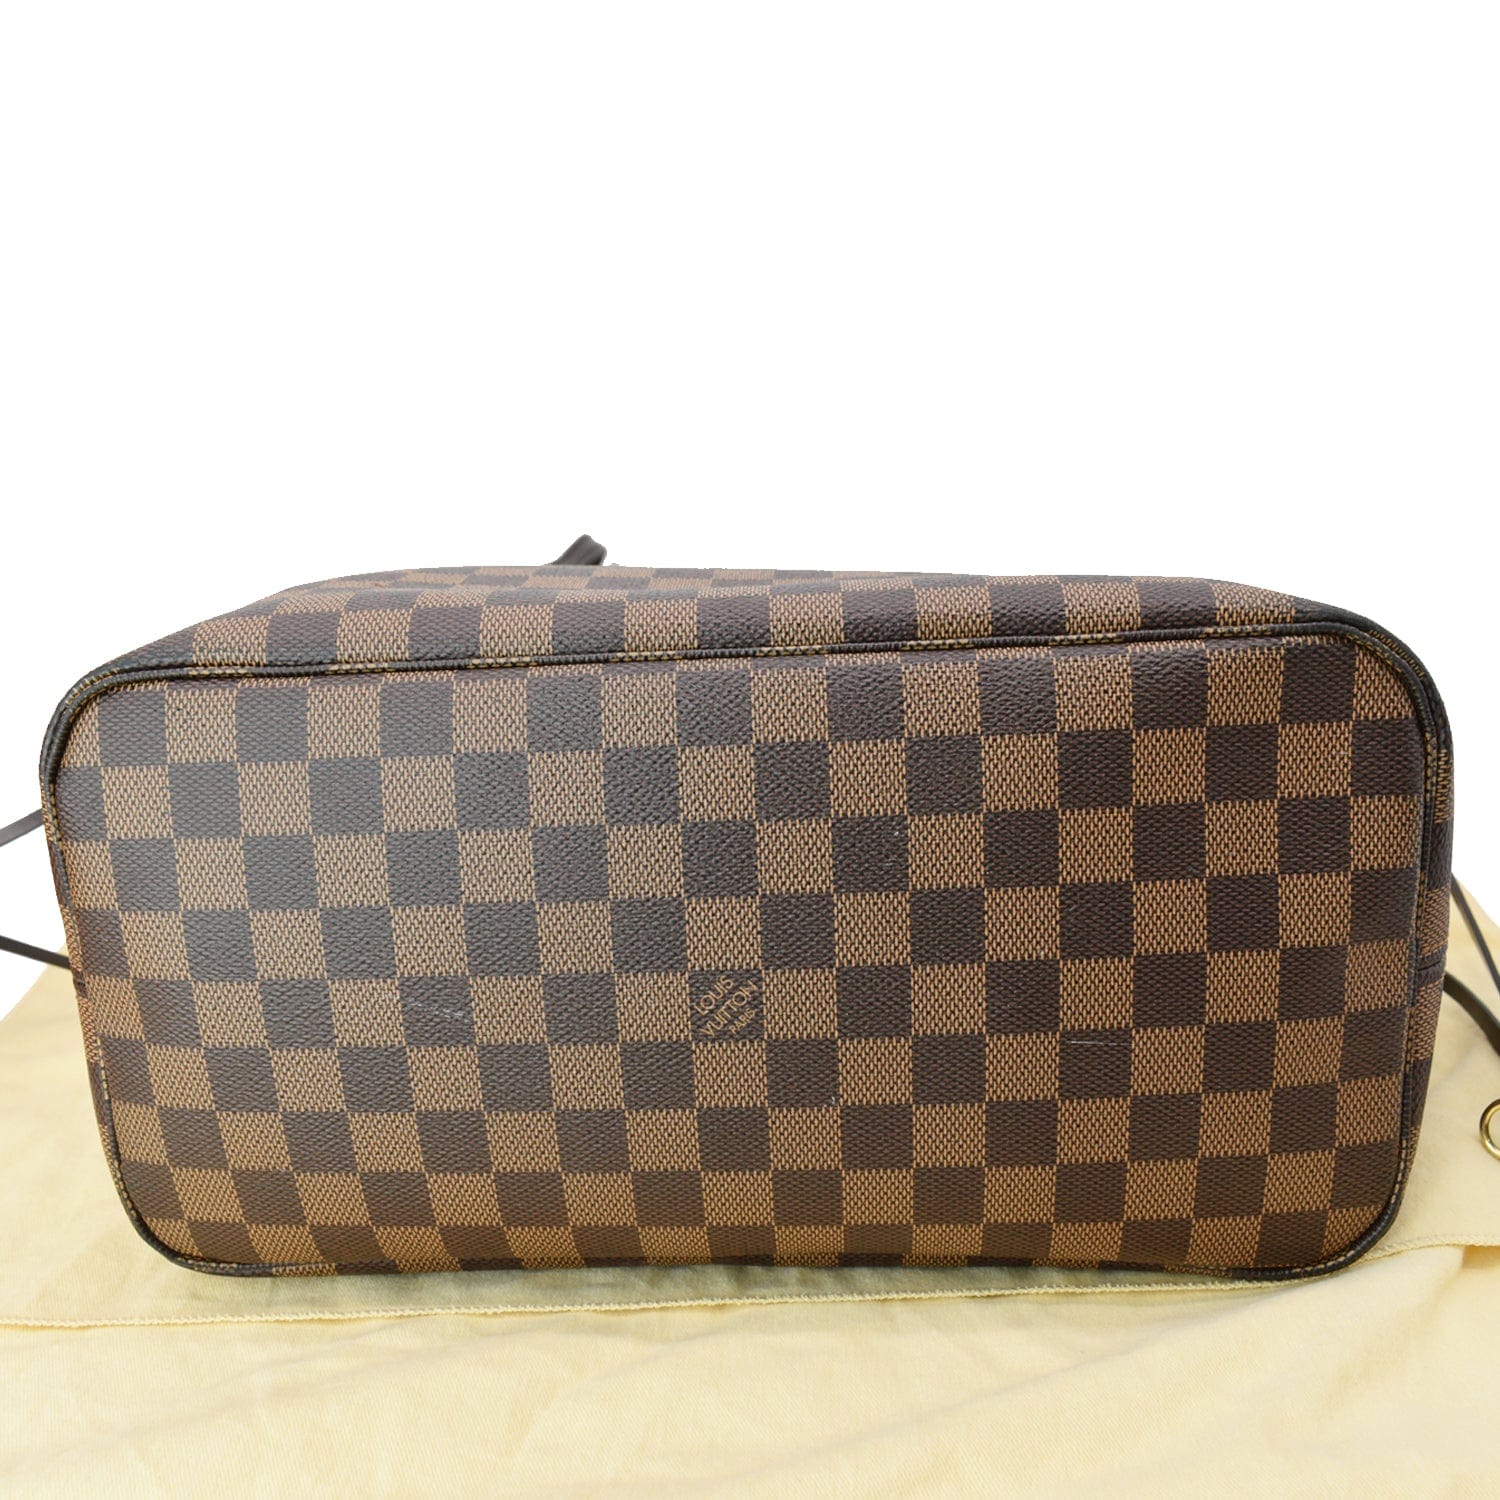 Louis Vuitton, Neverfull MM 1854 Navy Blue, Preowned - No Dustbag